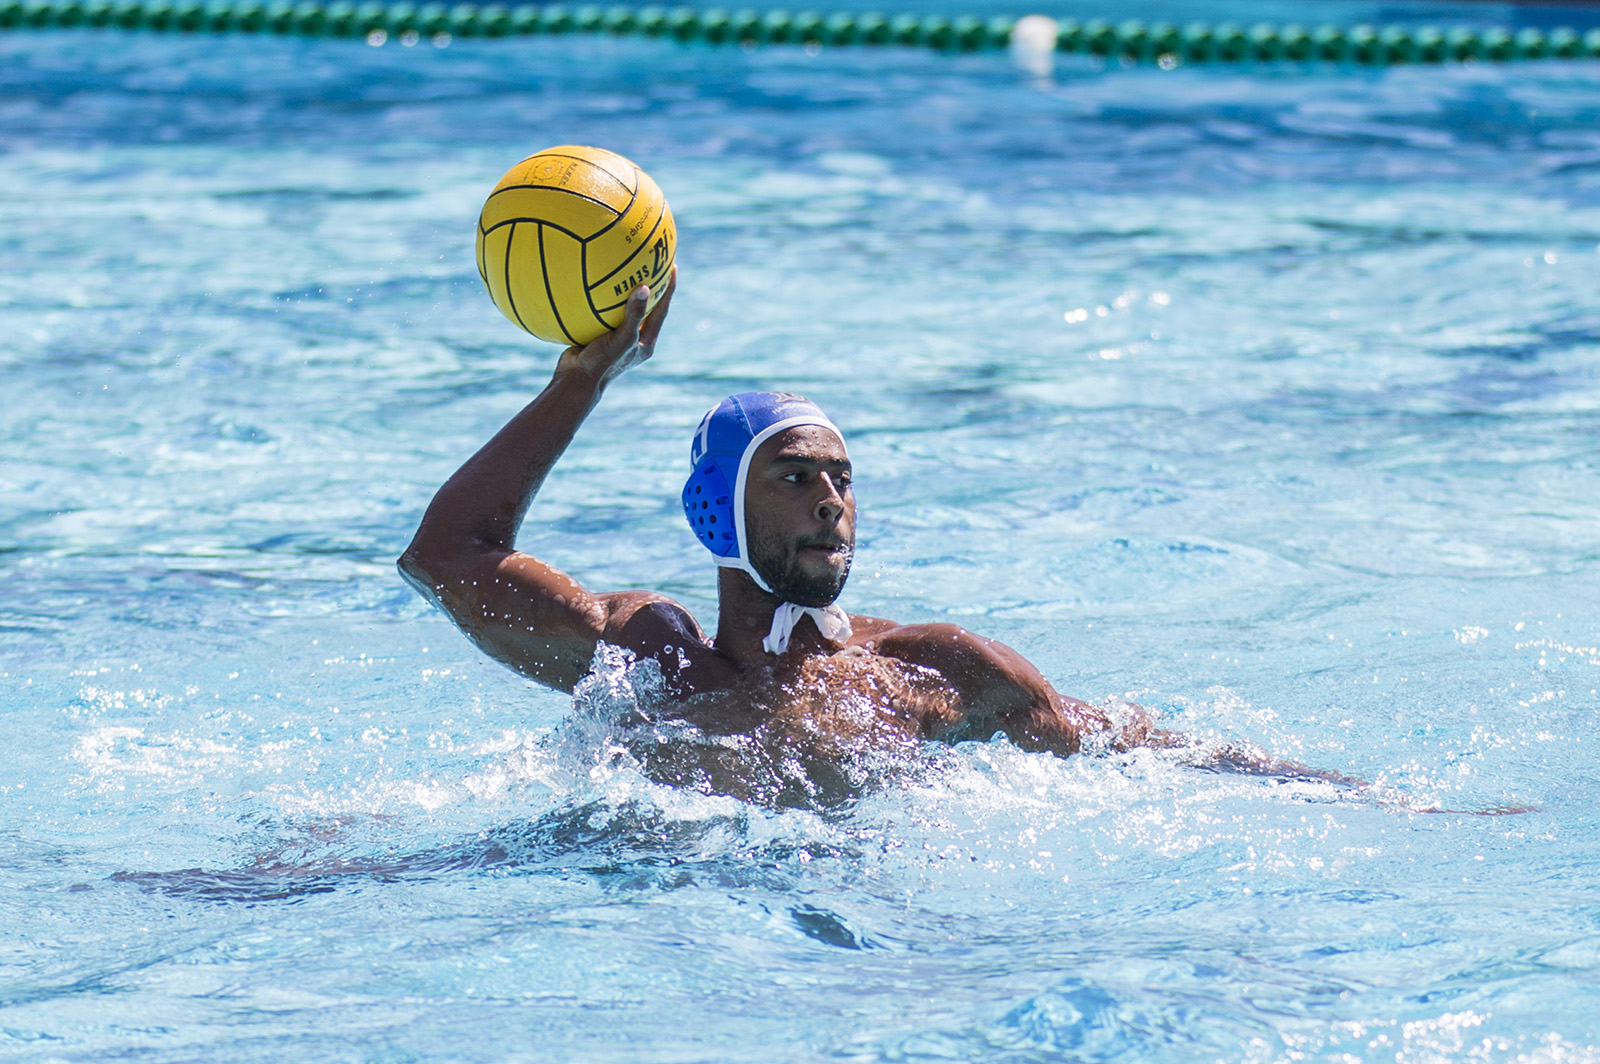 Men’s water polo ties national record with win over Pacific - Daily Bruin